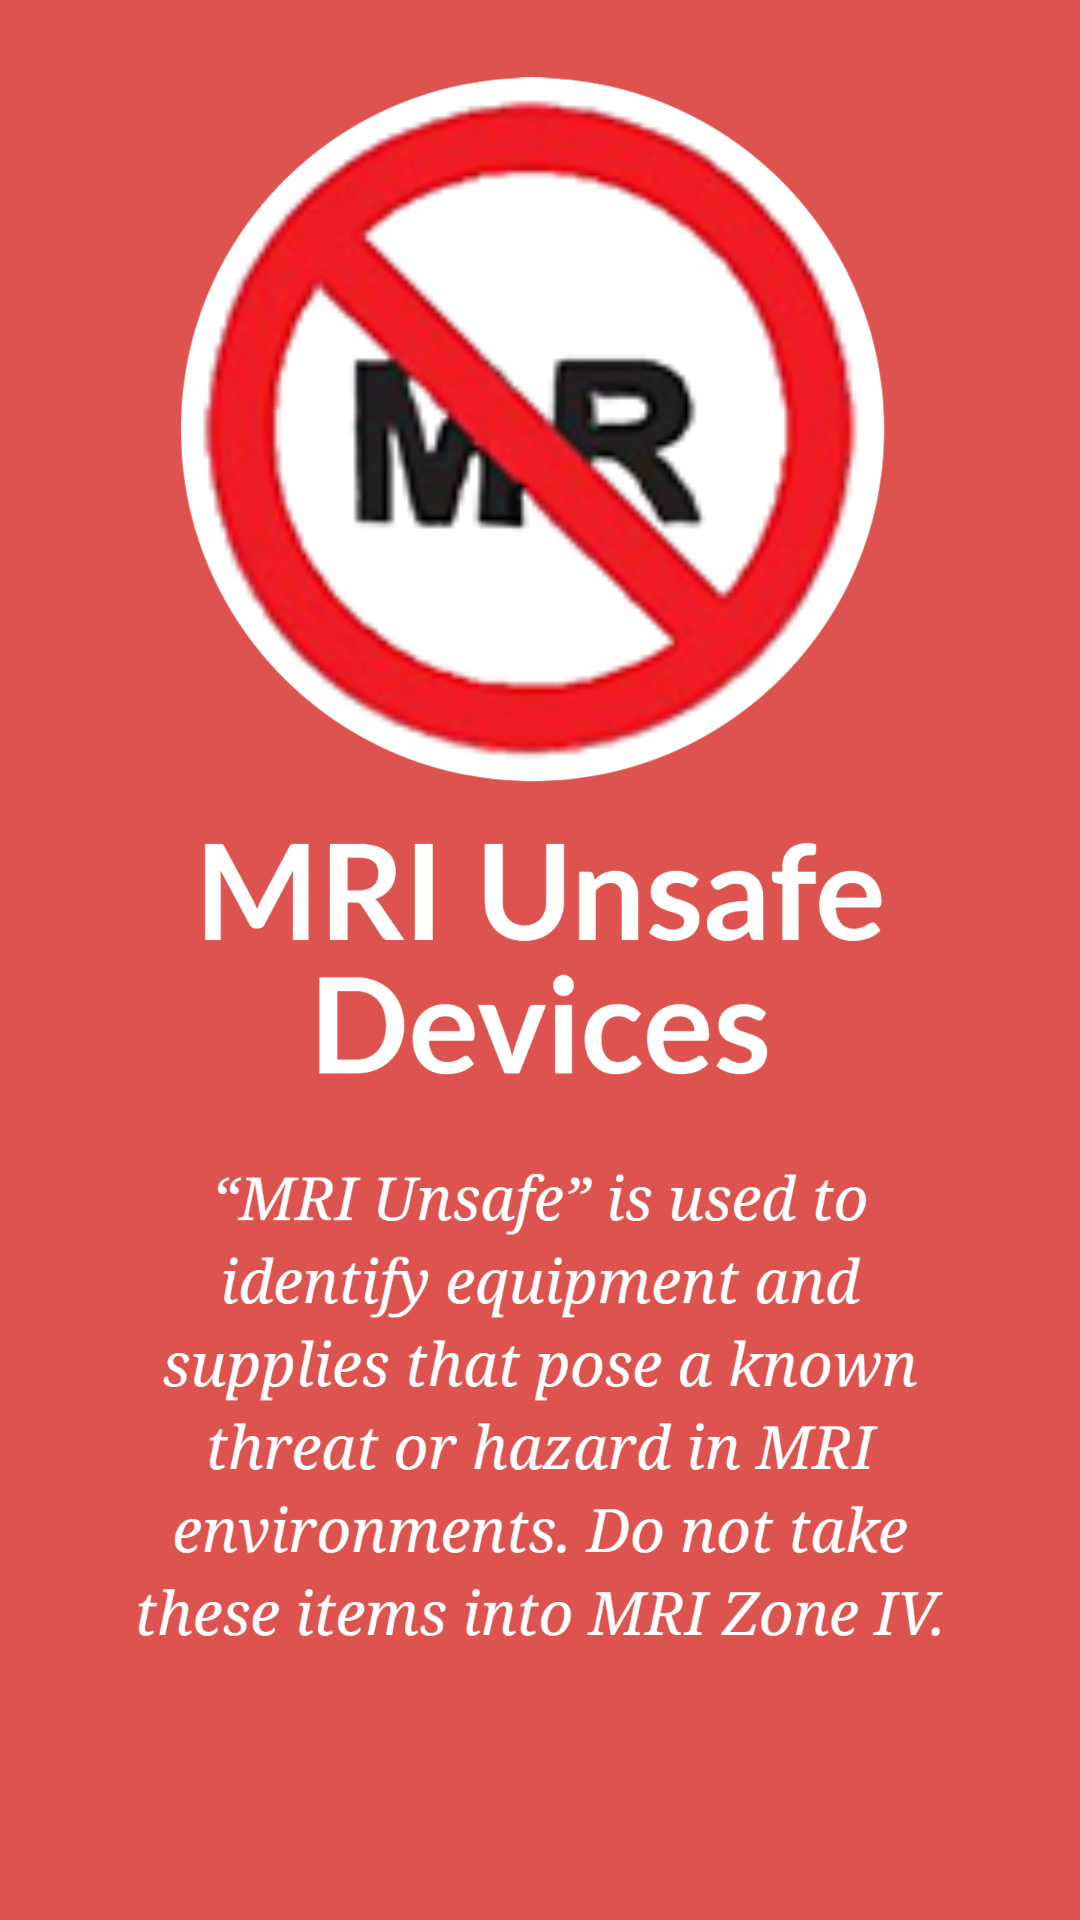 solid red background with a graphic of "MR" circled in red with a slash. Underneath are words that say "MRI Unsafe Devices" and “MRI Unsafe is used to identify equipment and supplies that pose a known threat or hazard in MRI environments. Do not take these items into MRI Zone IV."  